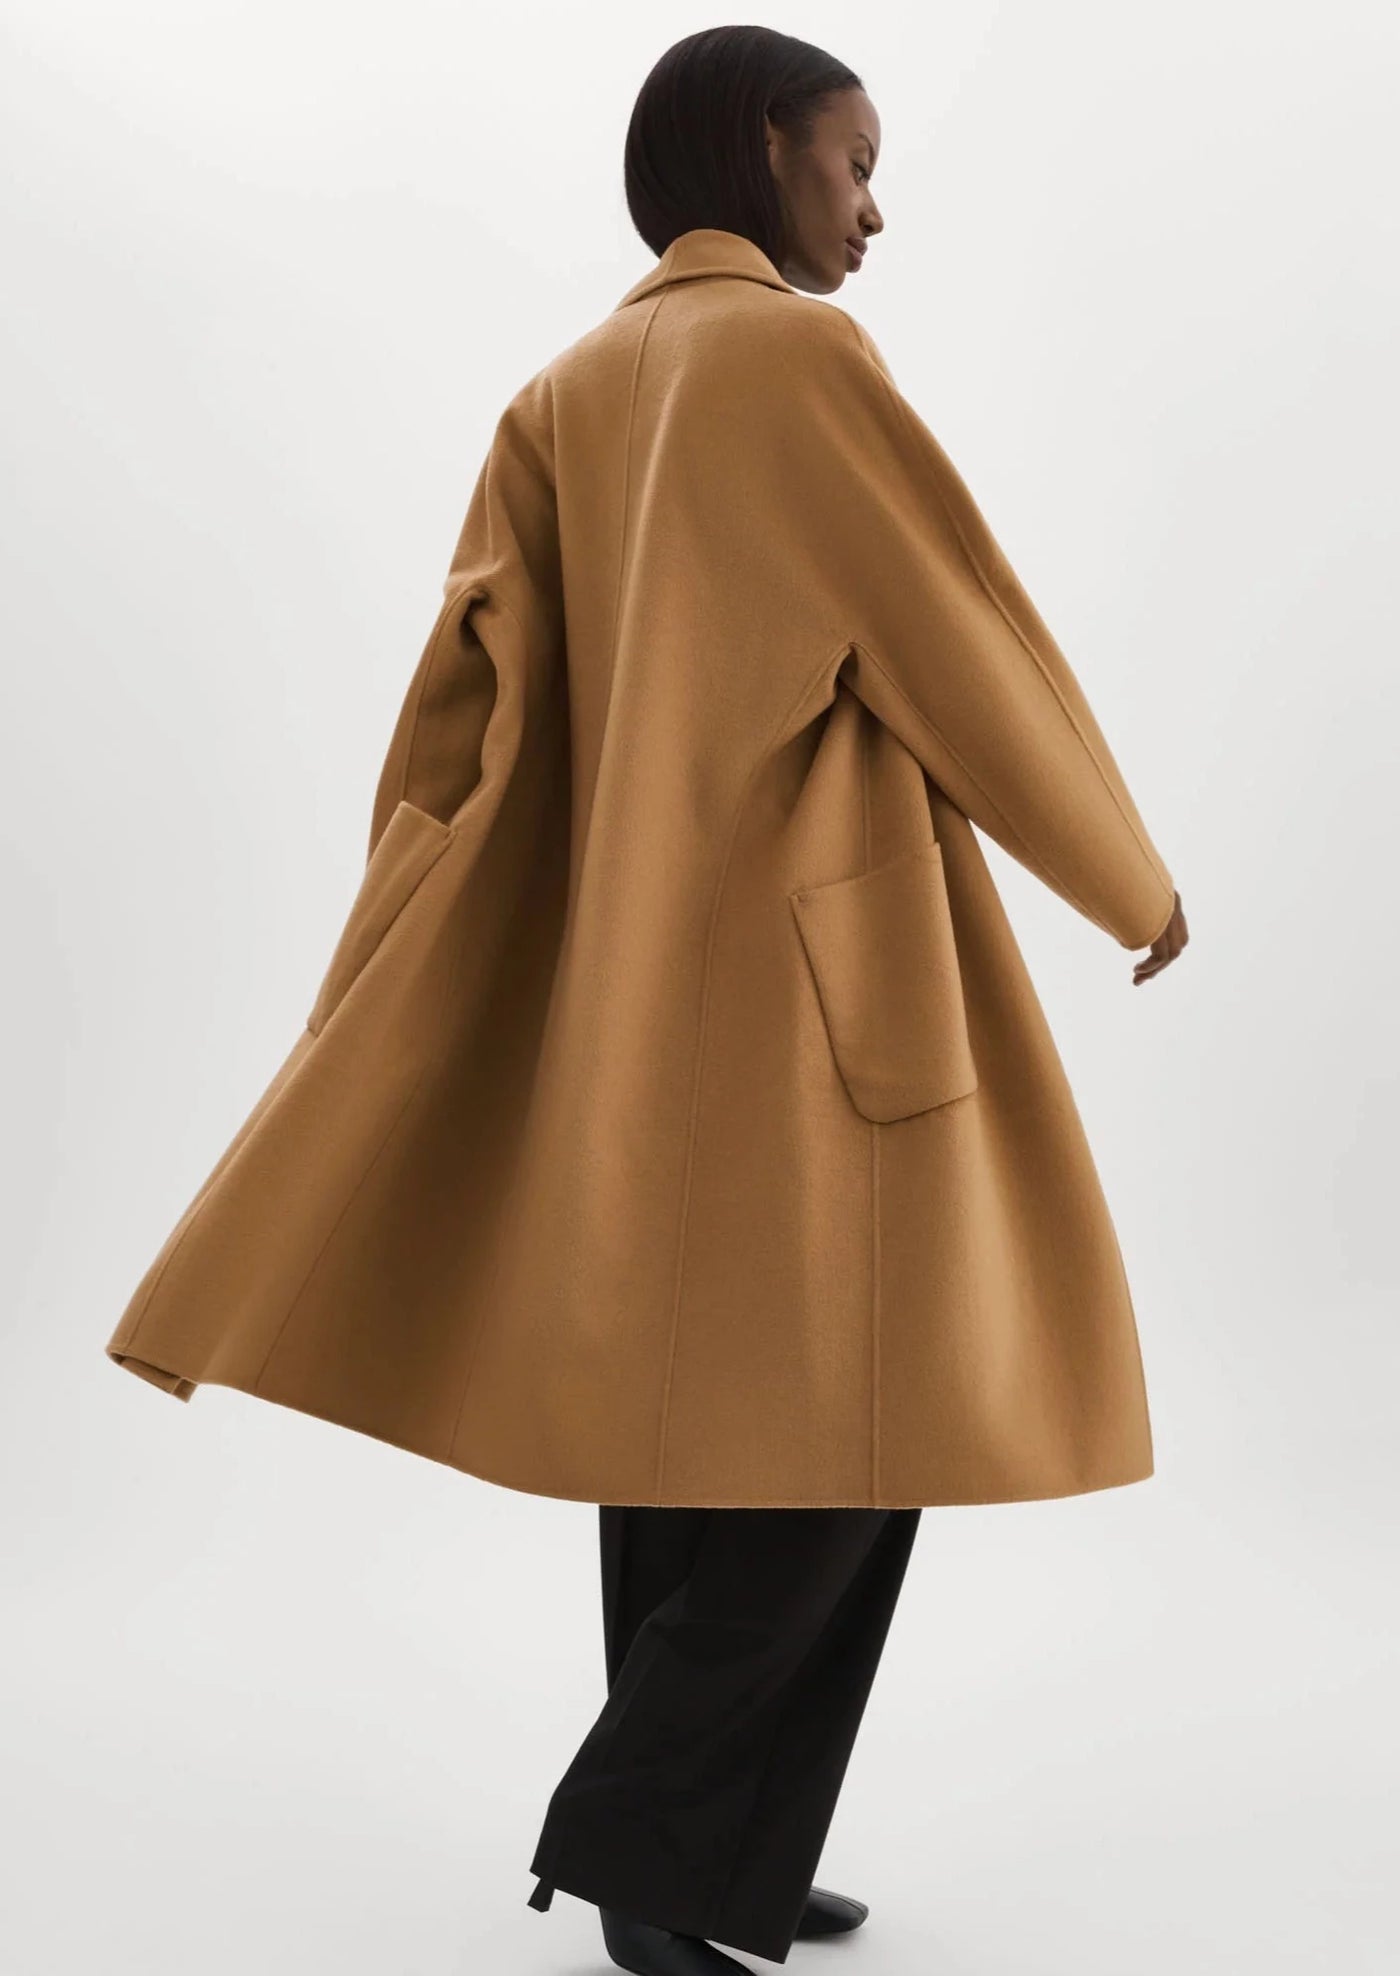 Lamarque Thara Double Faced Wool Coat - Camel